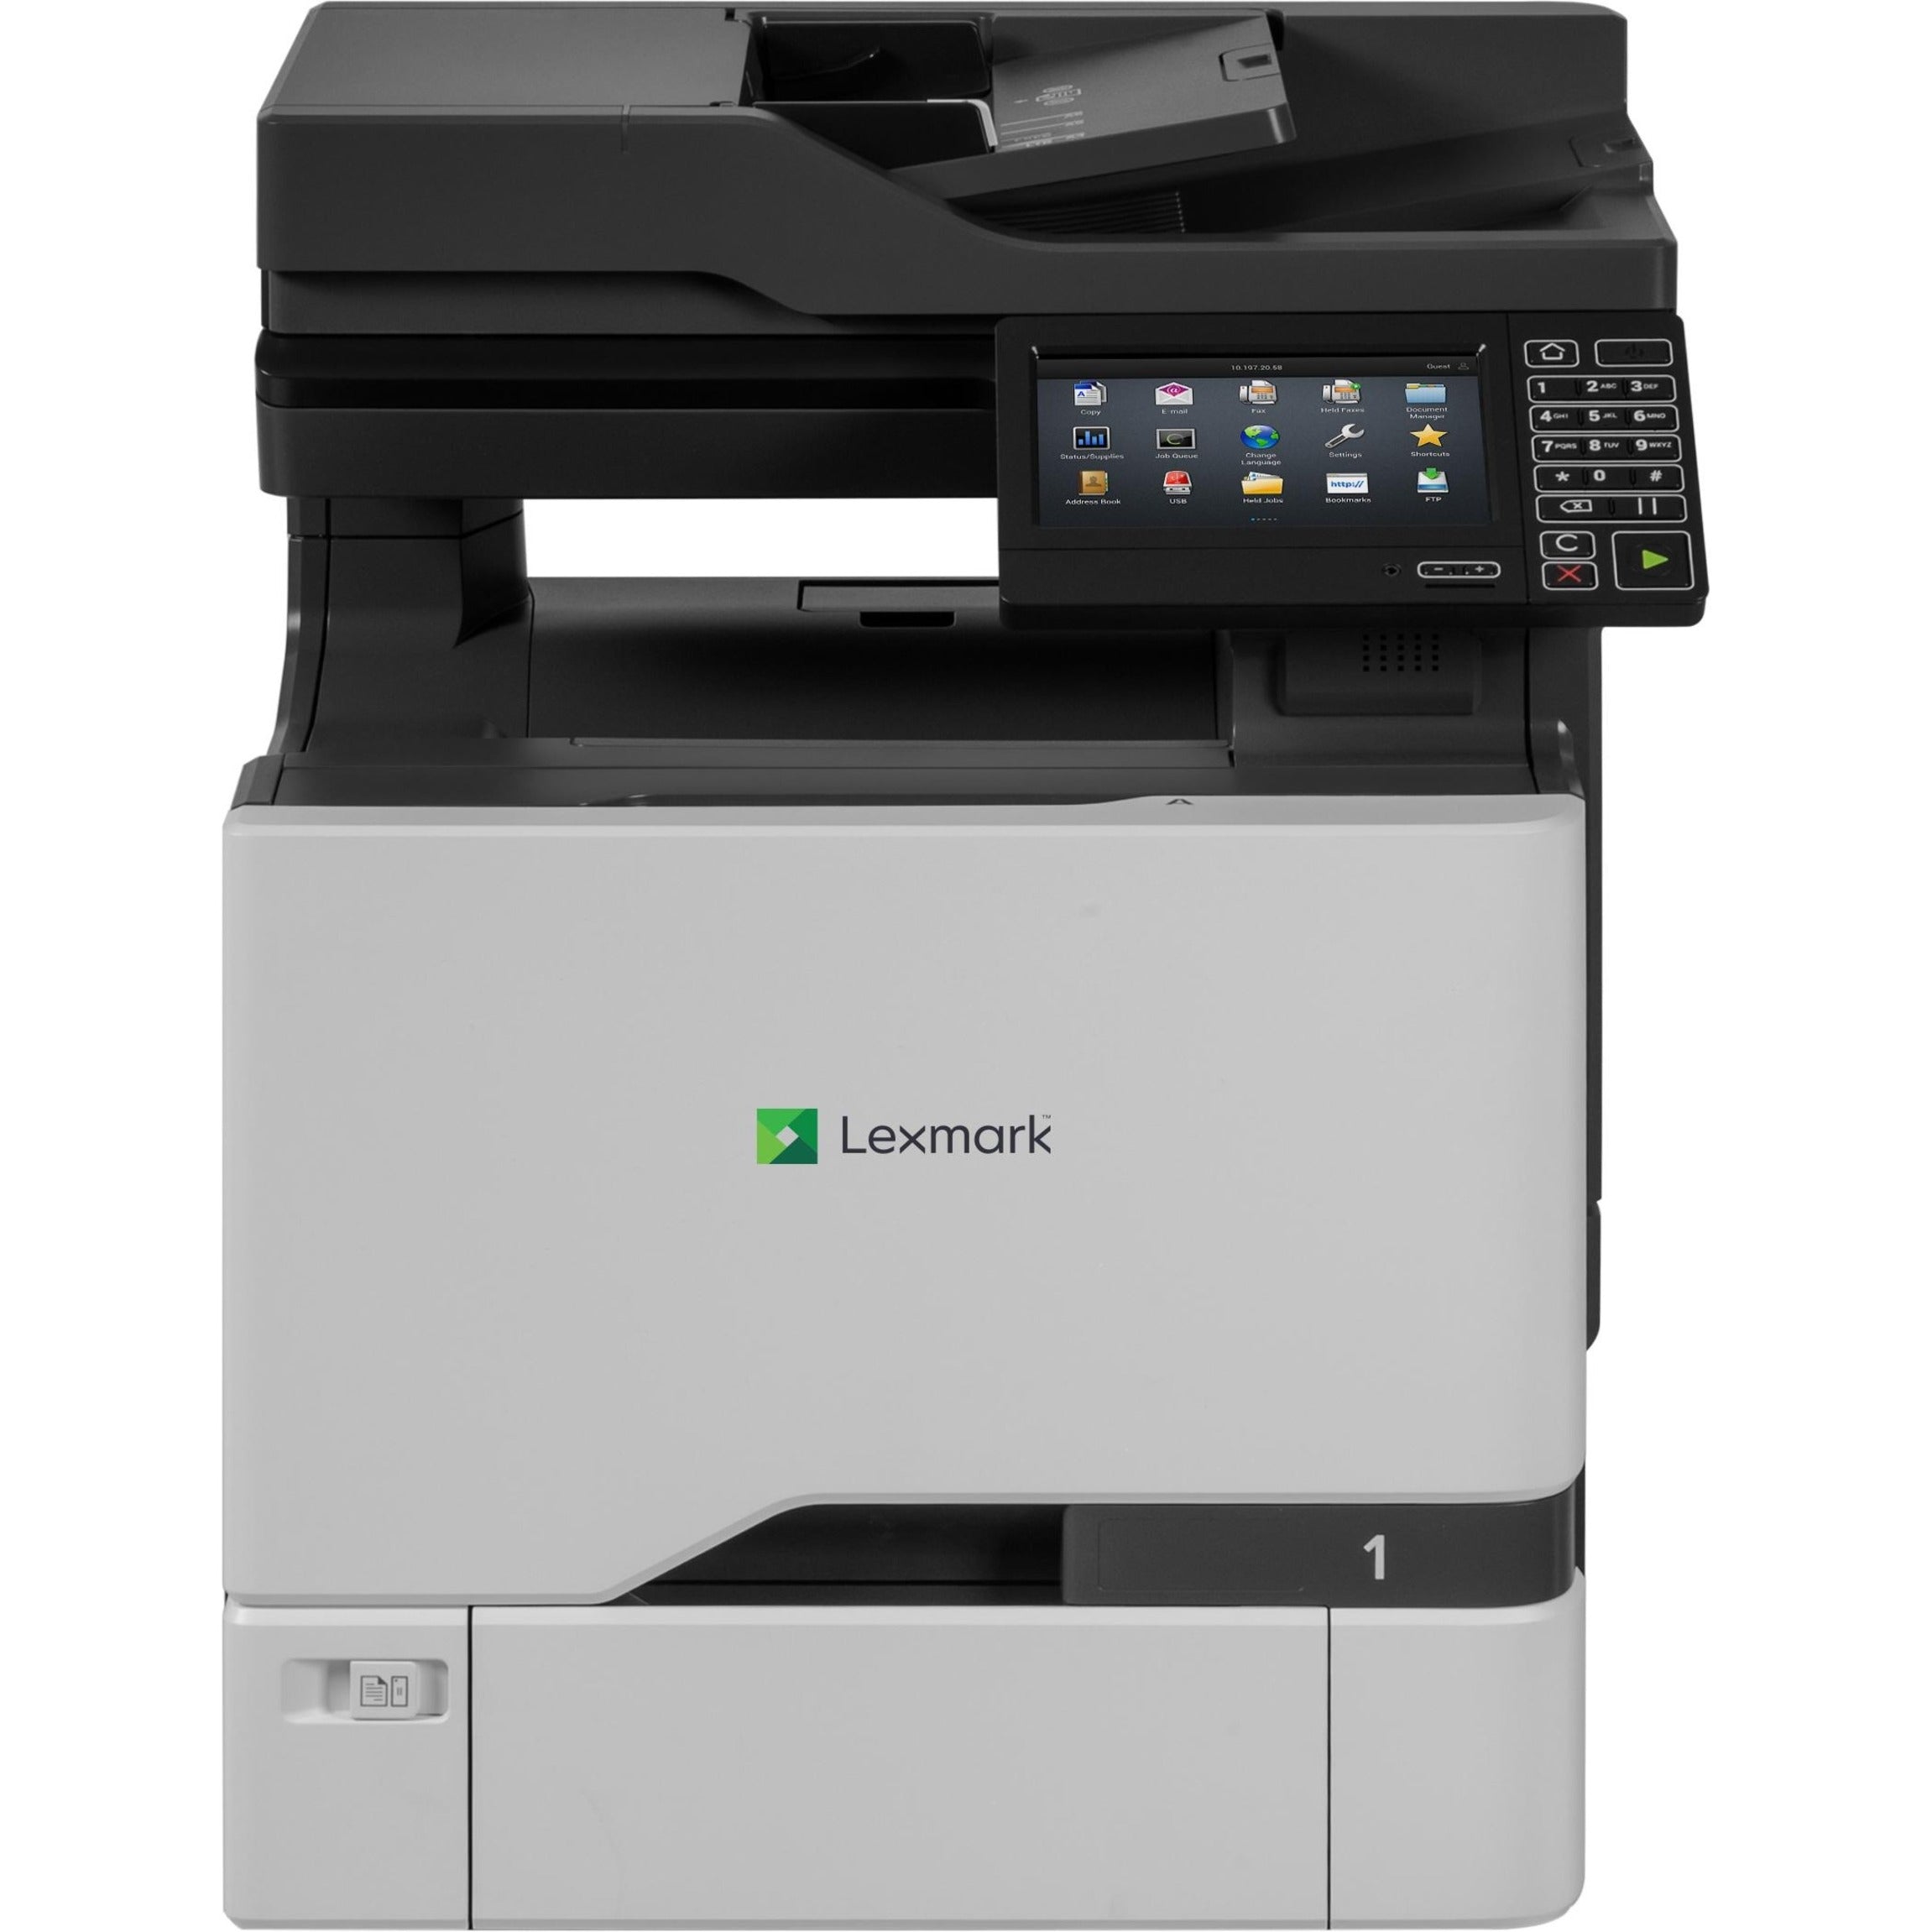 Lexmark 40C9501 CX725dhe Colour Laser Multifunction Printer With Hard Disk, Automatic Duplex Printing, 50 ppm Print Speed, 1200 x 1200 dpi Resolution